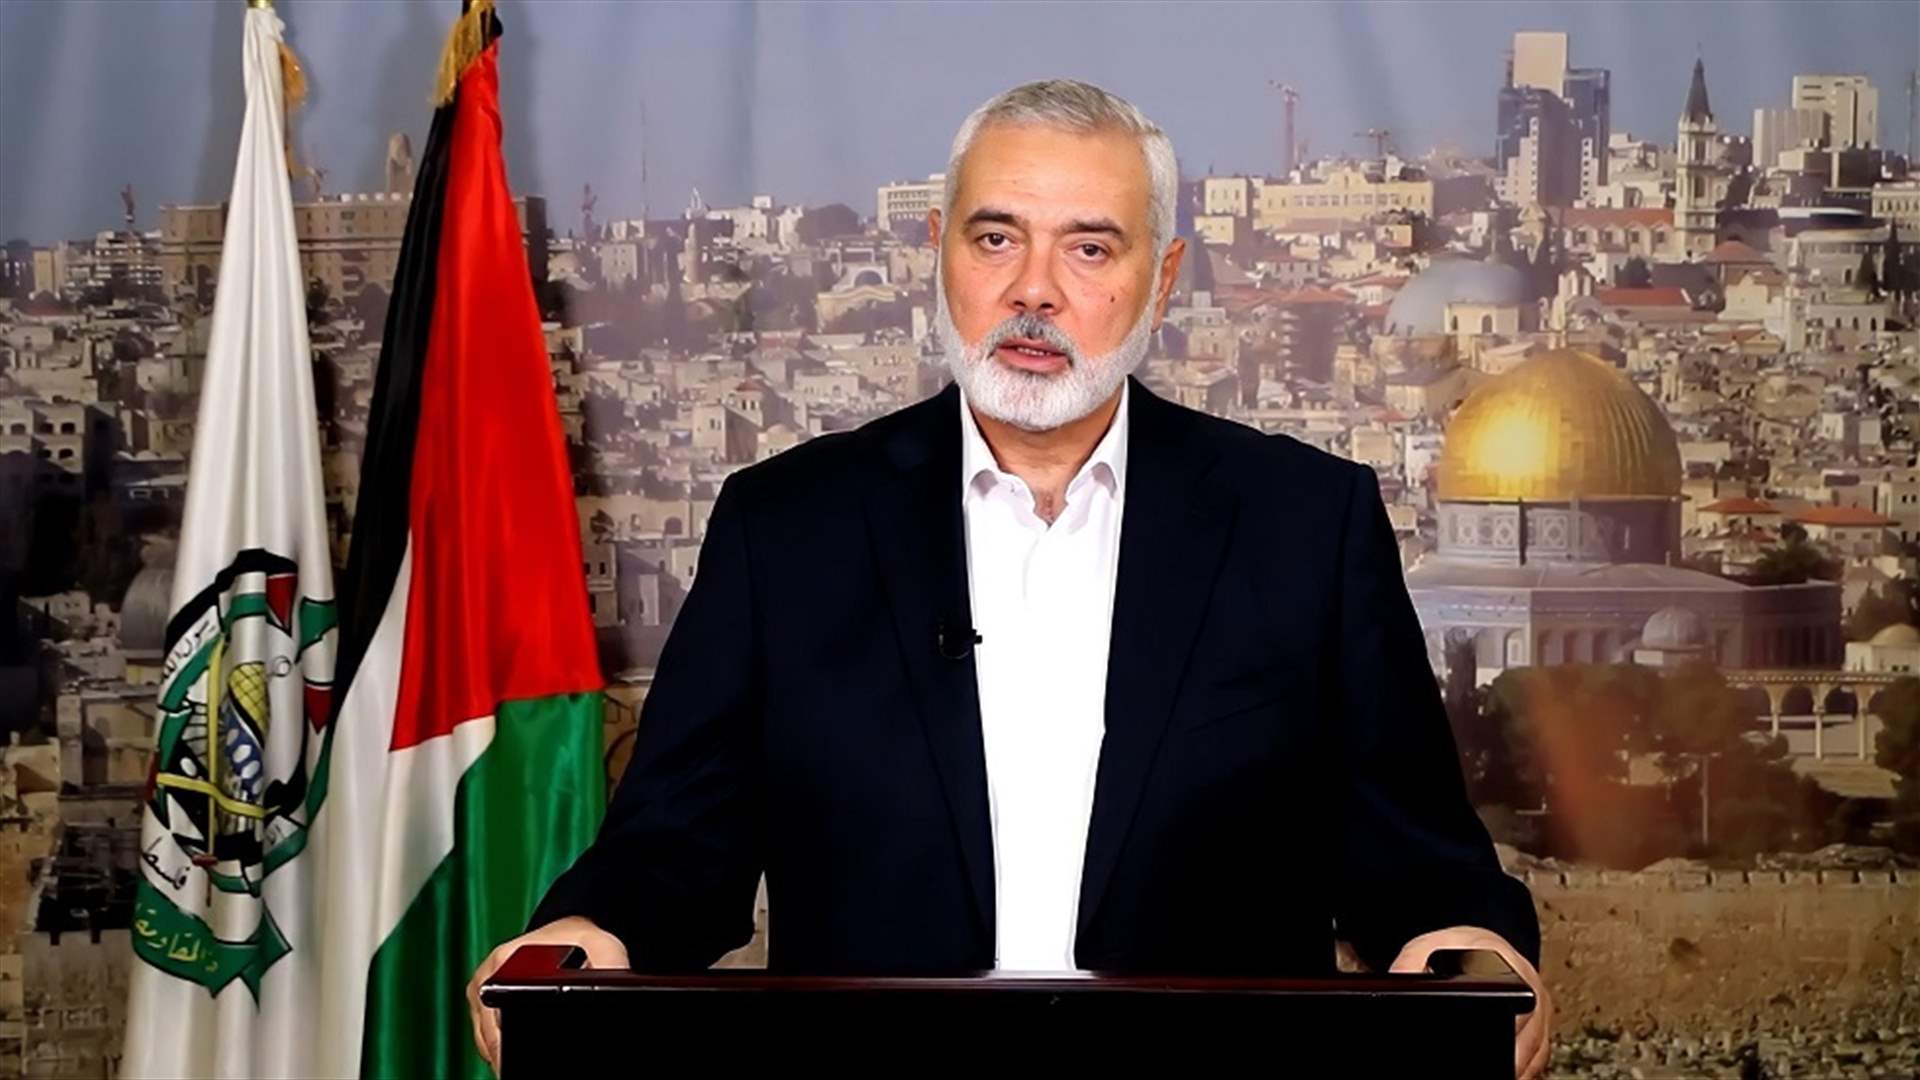 Hamas Leader discusses urgent Gaza situation with Lebanese Prime Minister